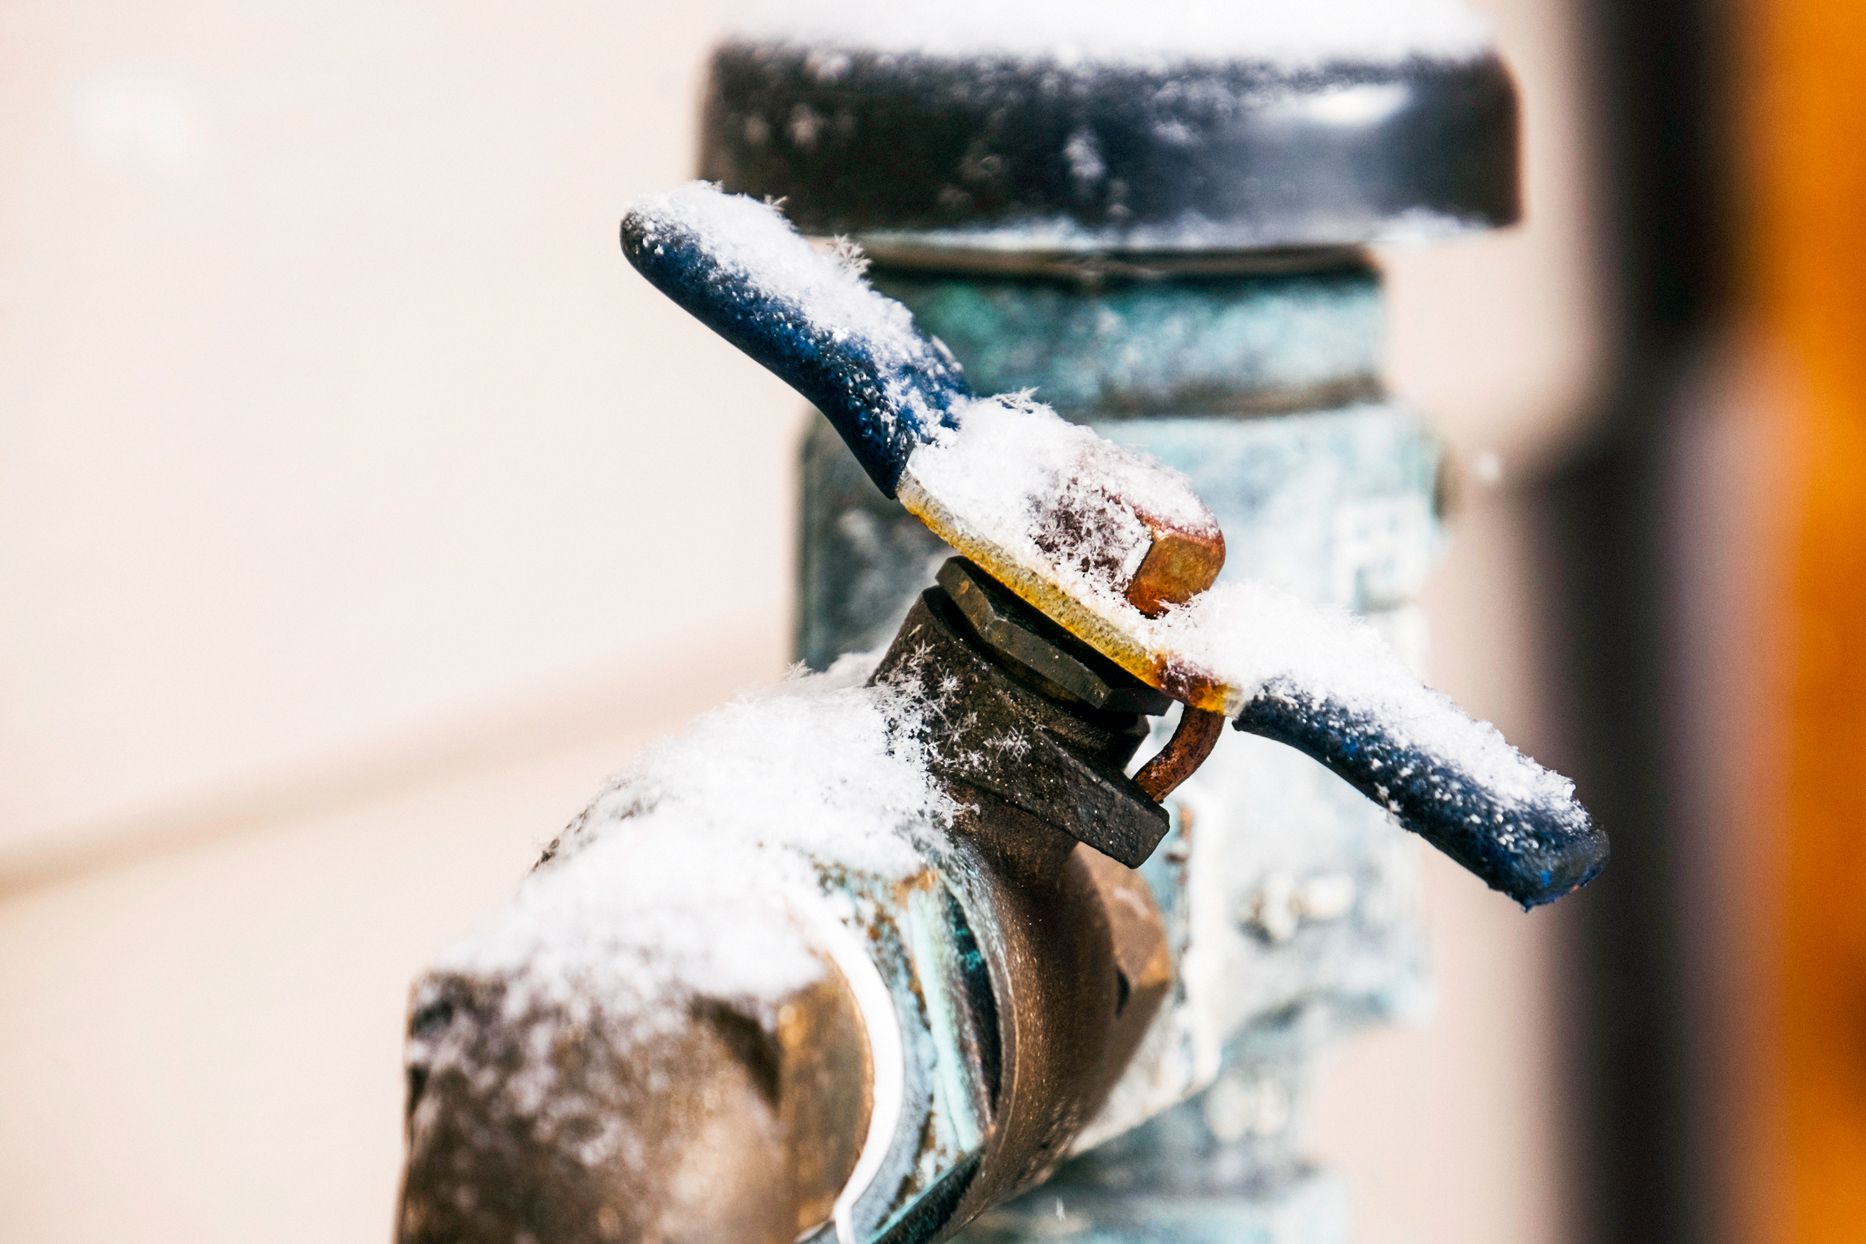 How To Protect Outdoor Plumbing From Freezing